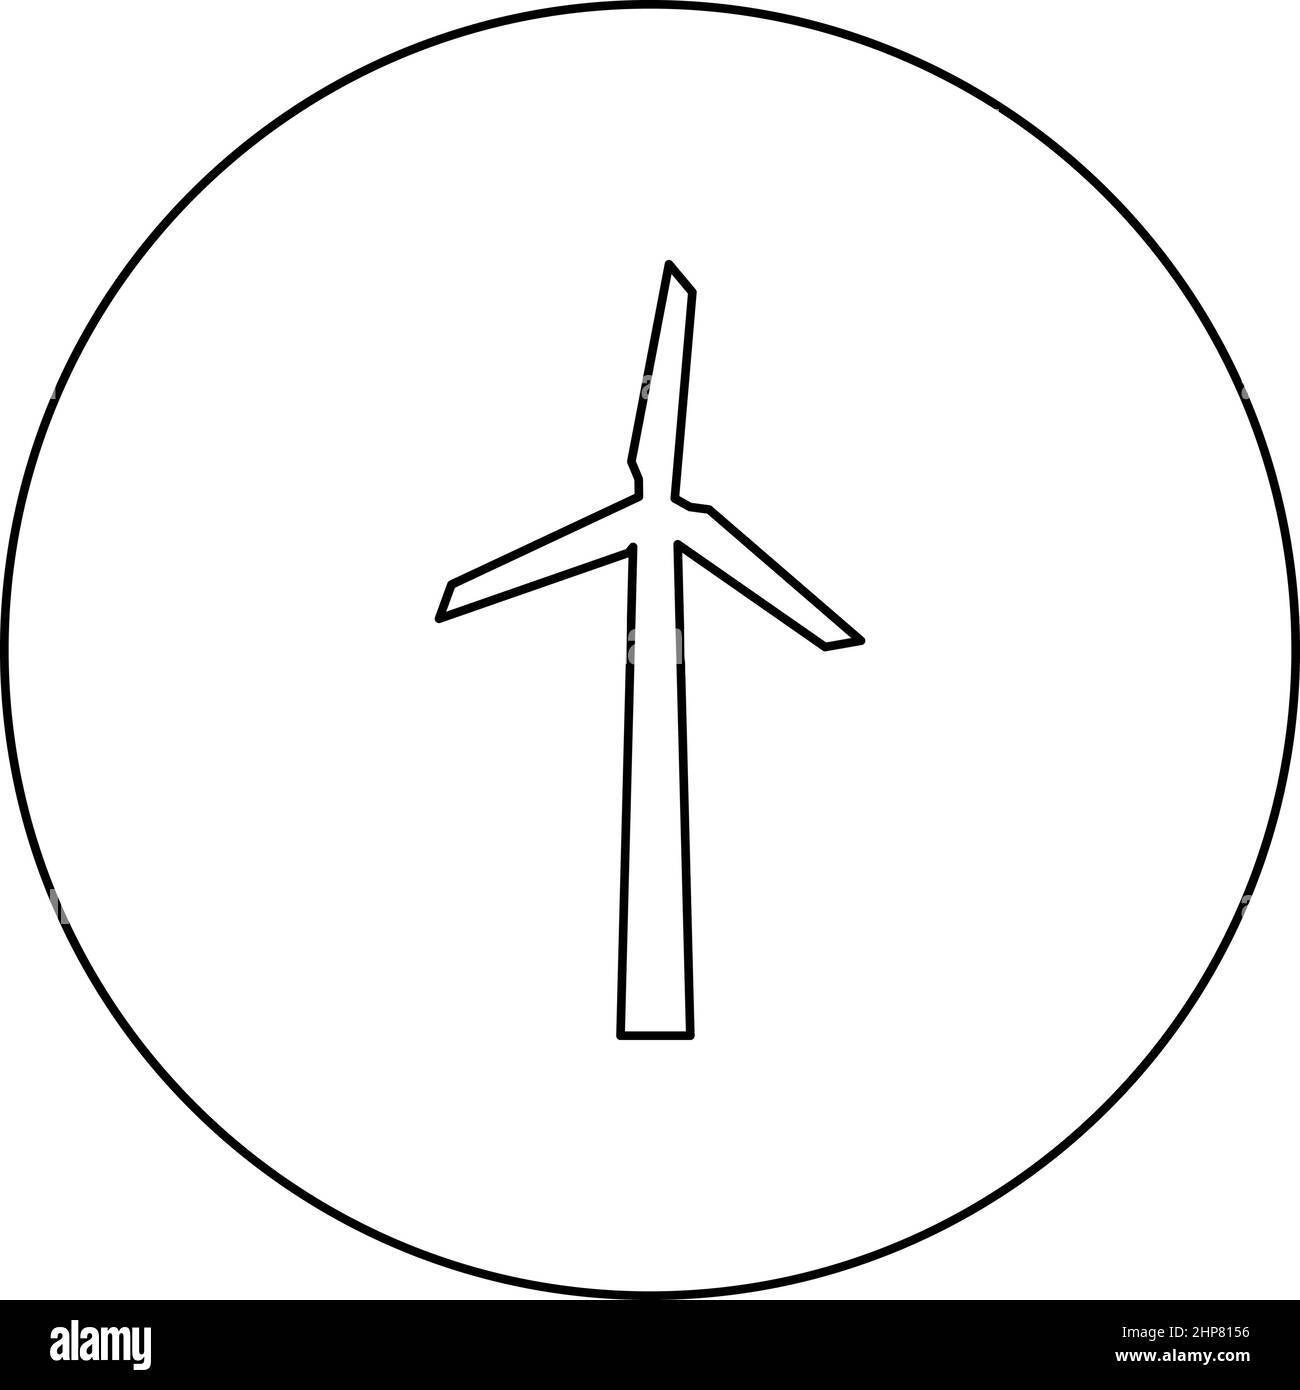 Wind generator icon in circle round black color vector illustration image outline contour line thin style Stock Vector